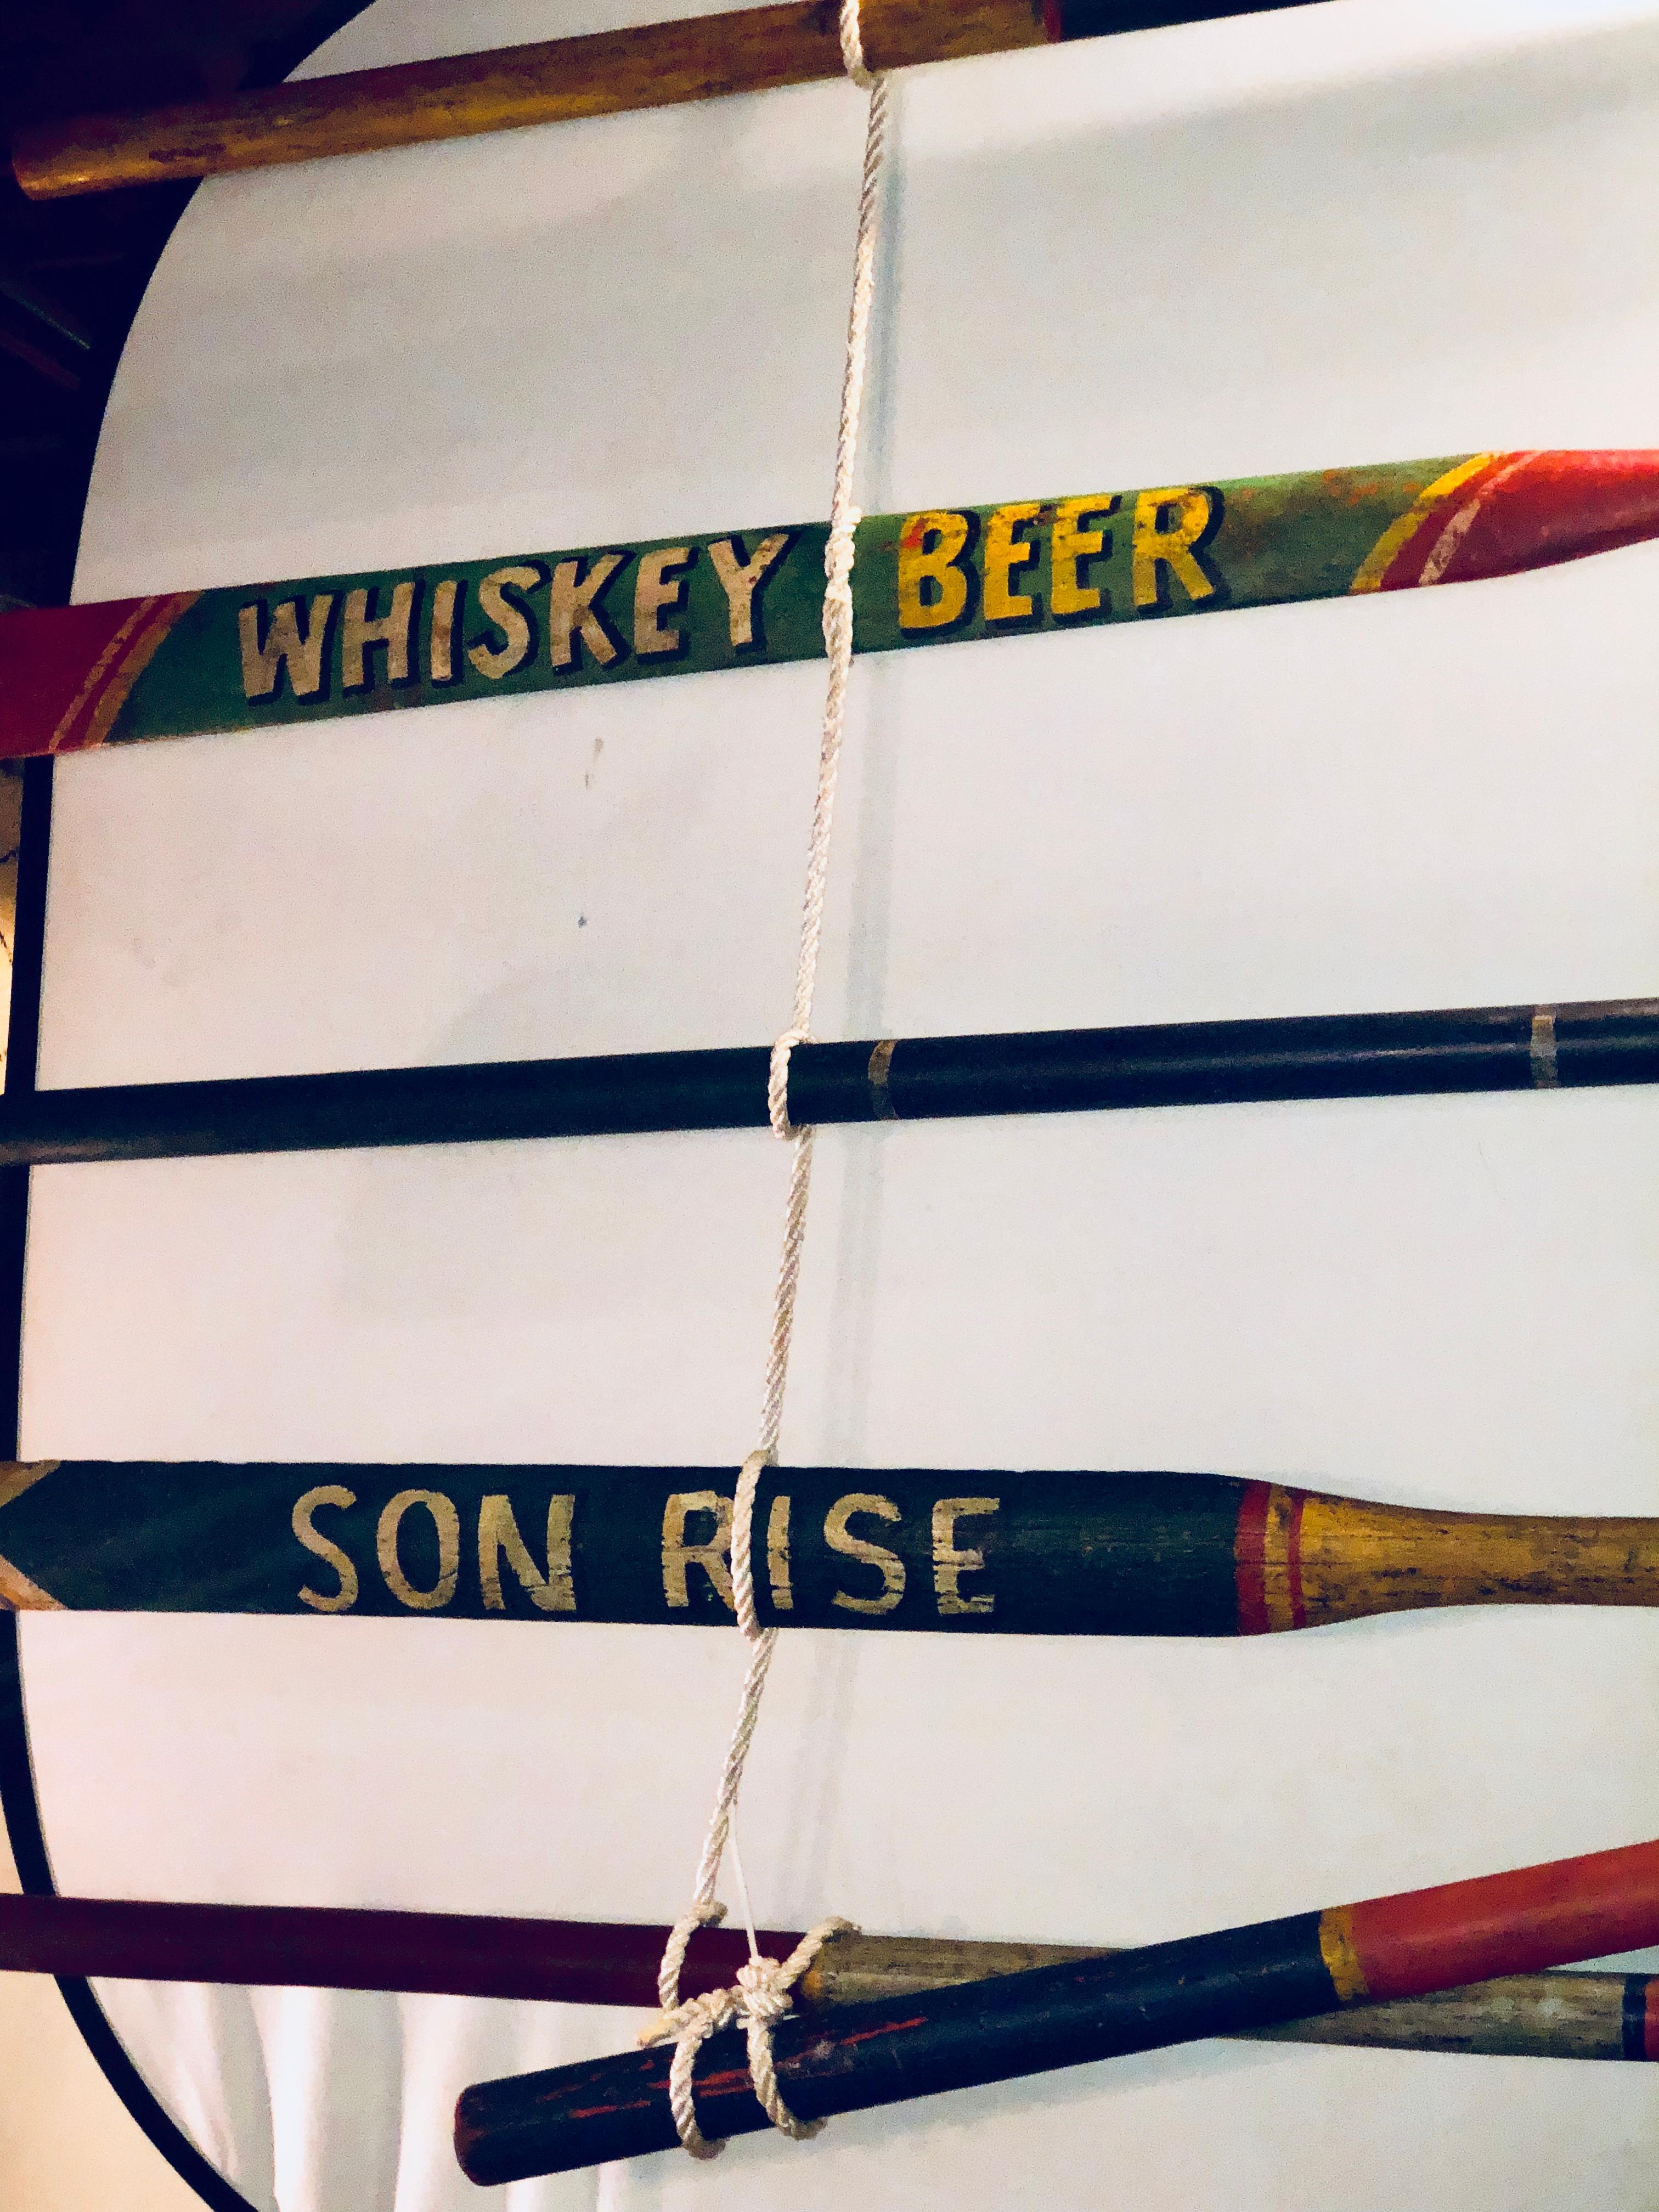 Set of 8 Hand-Painted Inspirational Rowing Oars or Paddles Priced Individually 4